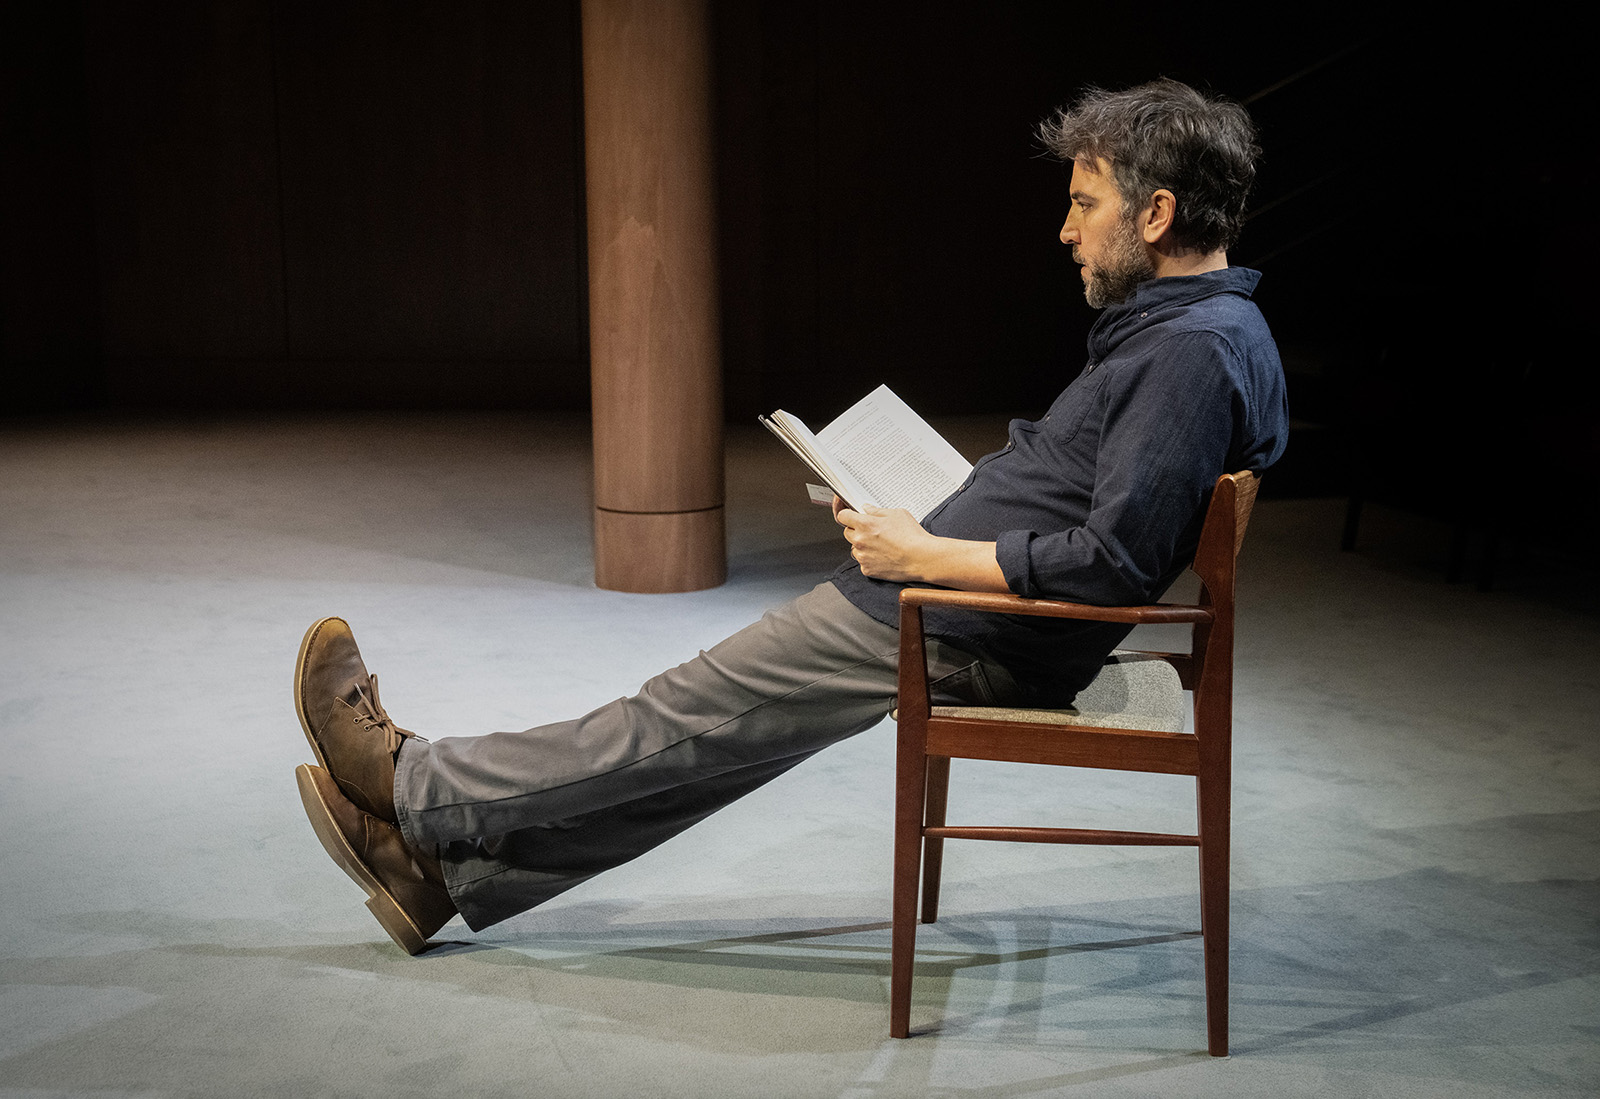 Actor Josh Radnor in "The Ally" at New York's Public Theater. (Photo by Joan Marcus)